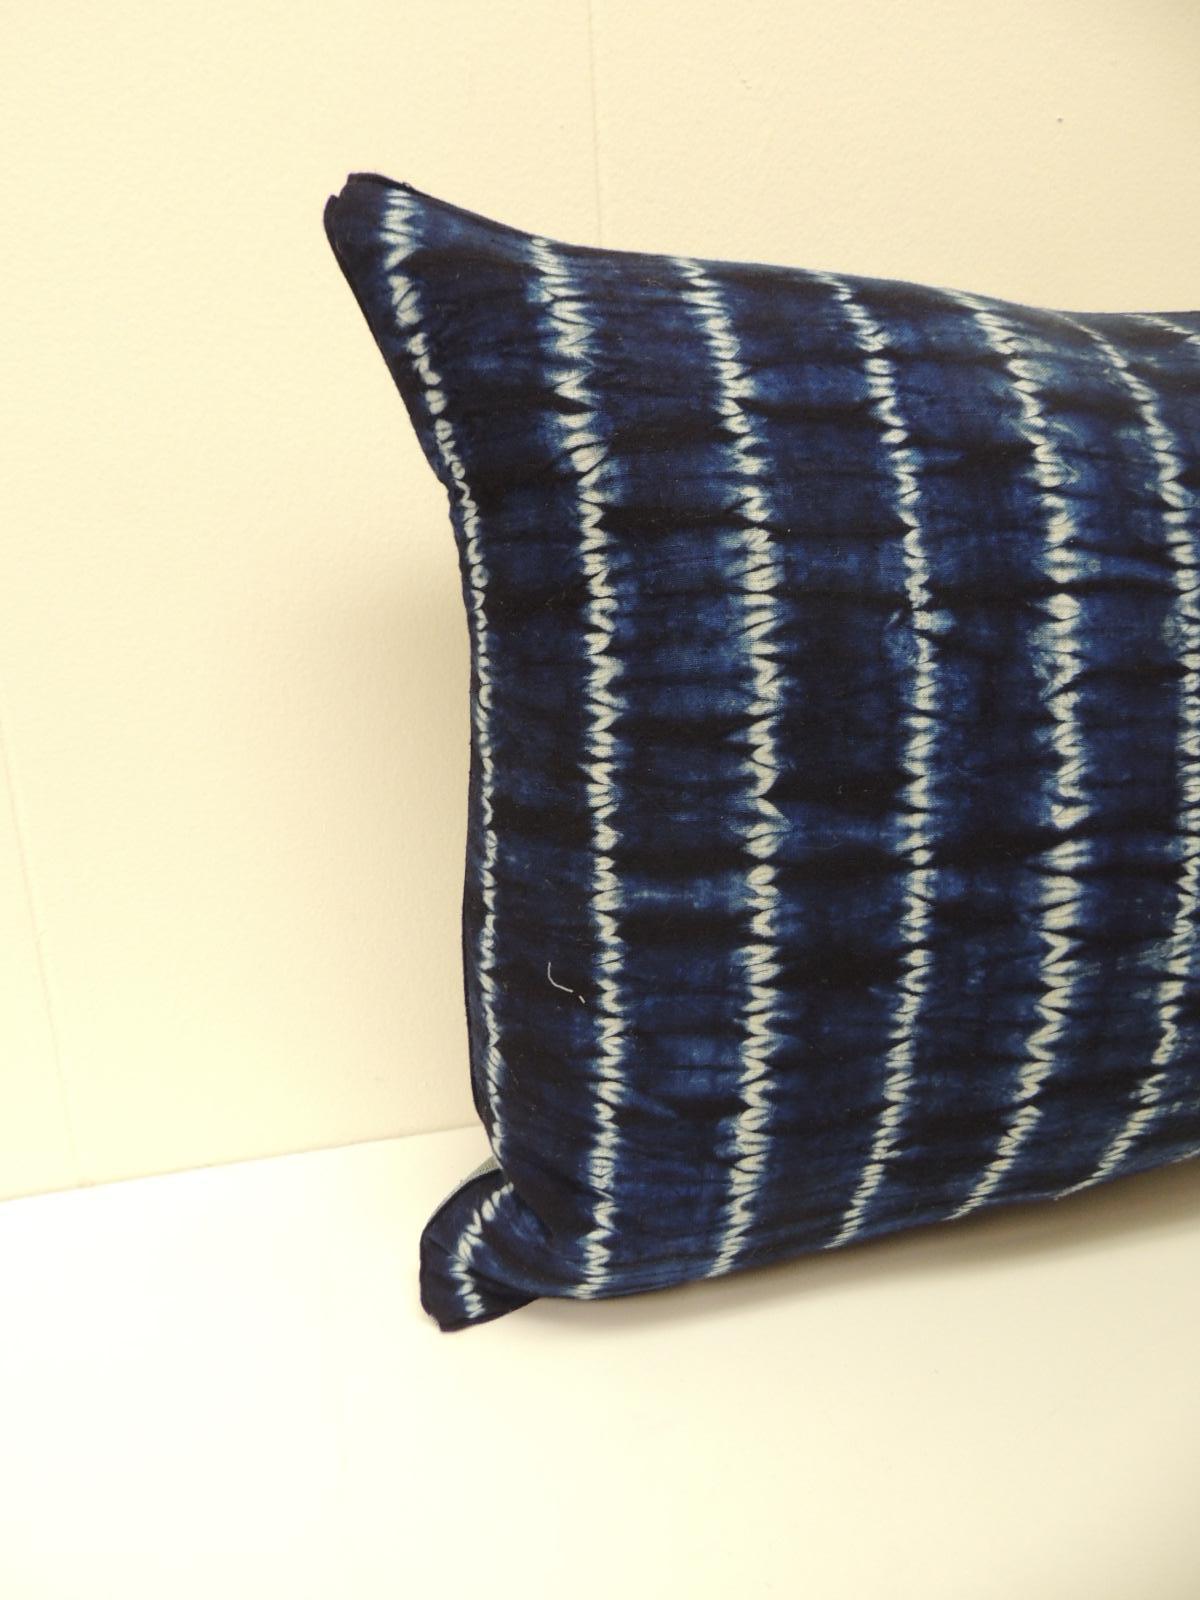 Vintage Indigo and White African Resist-Dyed Textile Decorative Pillow
Square pillow with textured silvery blue backing and small dark blue 
decorative trim all around made from the same vintage textile.
Decorative pillows handmade and designed in